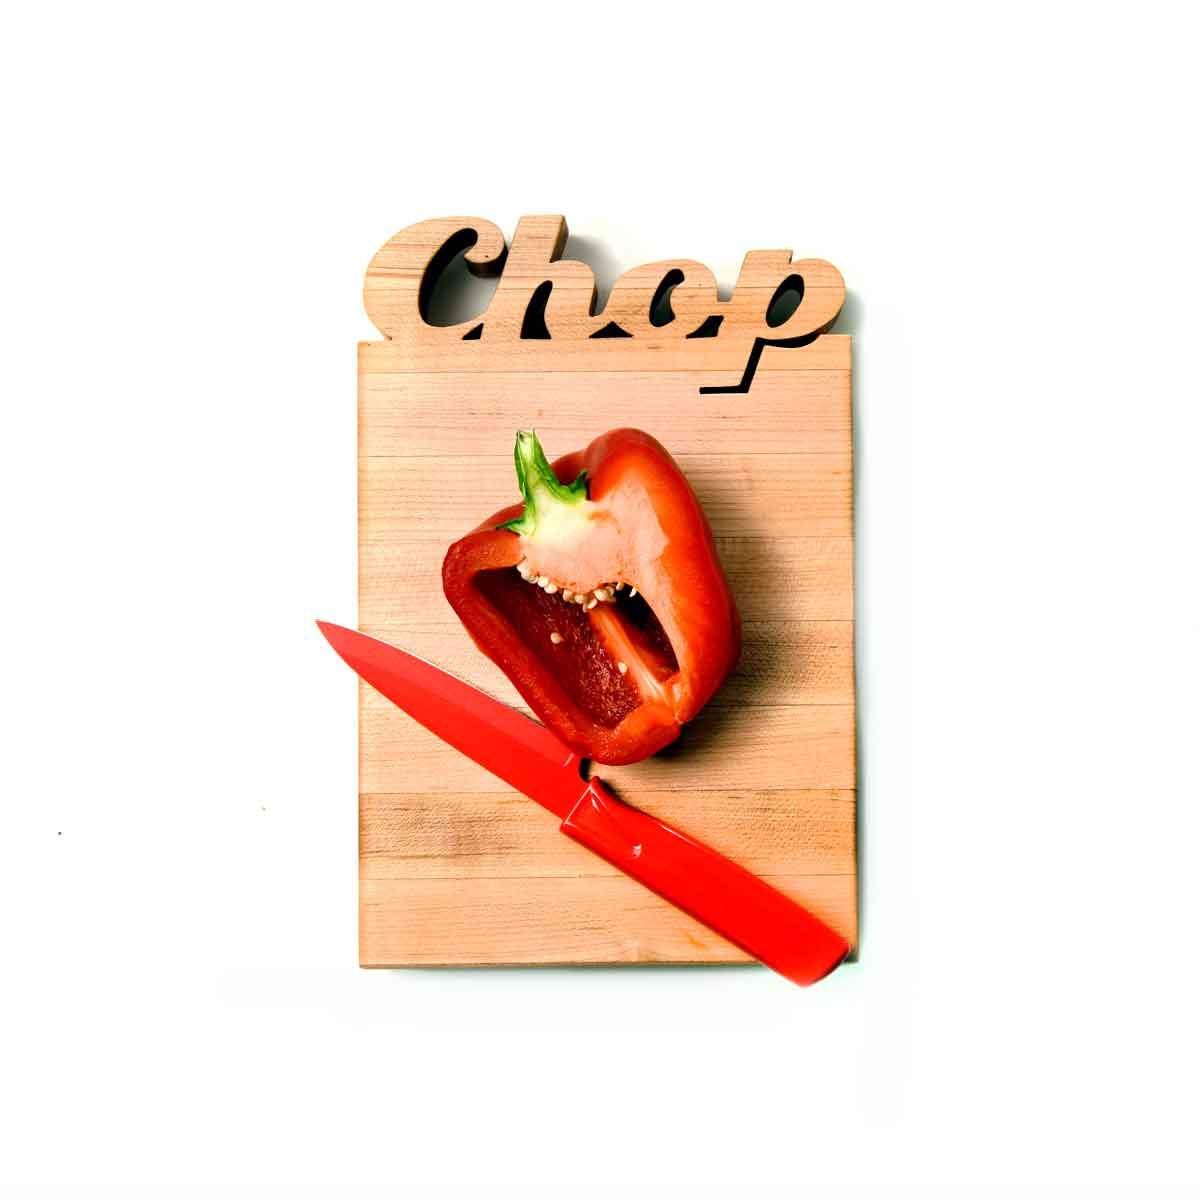 mini cutting boards - Chop cut out of wood - with bottle opener option